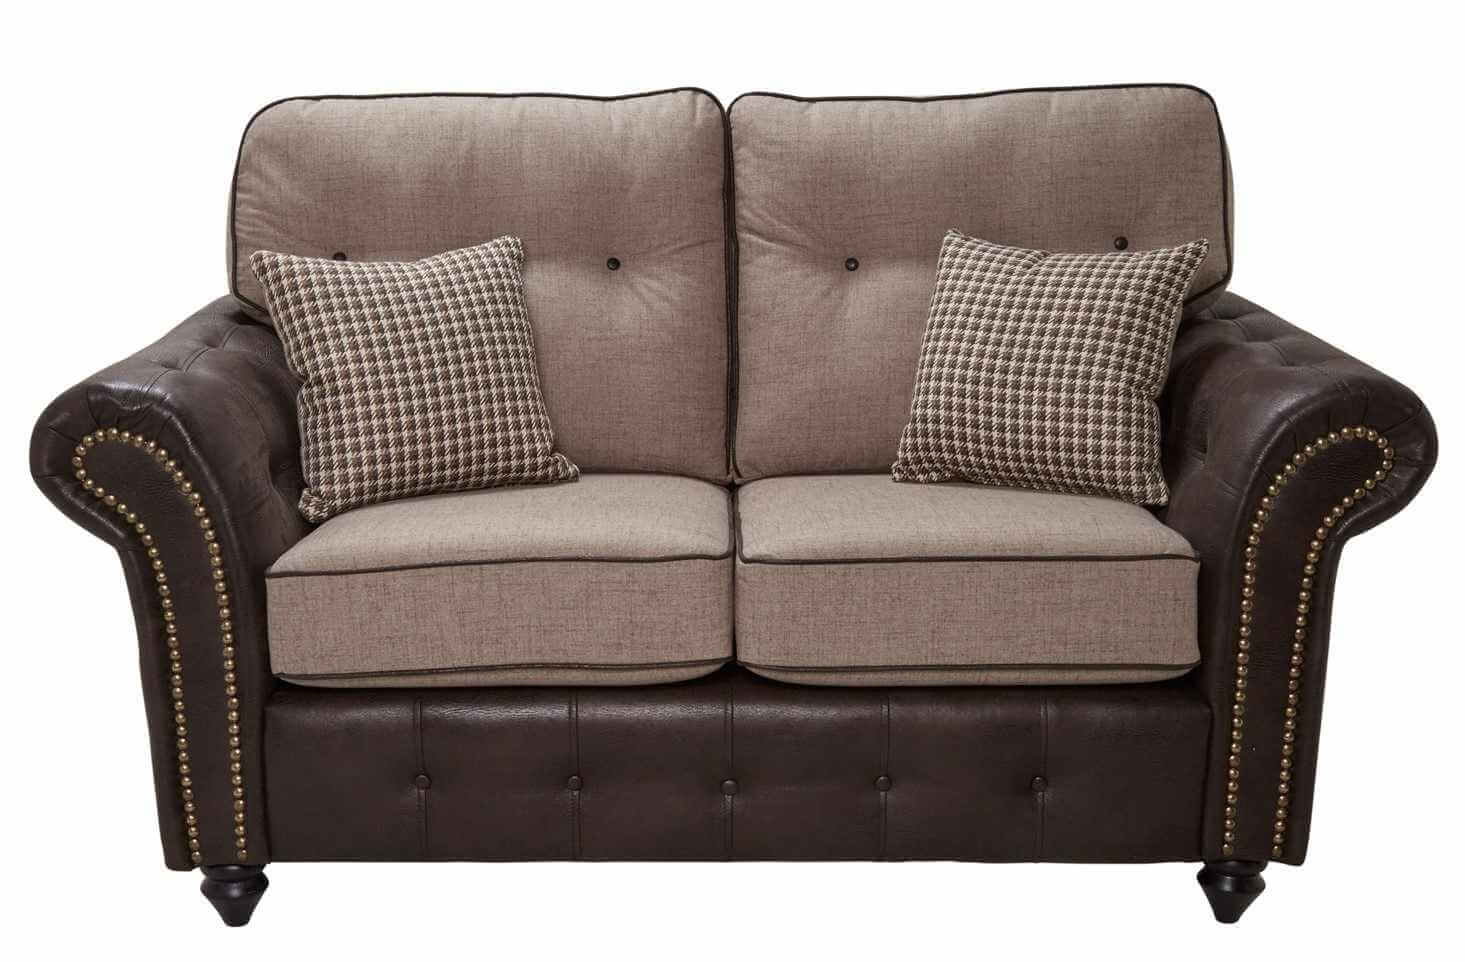 Finding the Perfect Sofa: Balancing Budget and Quality  %Post Title